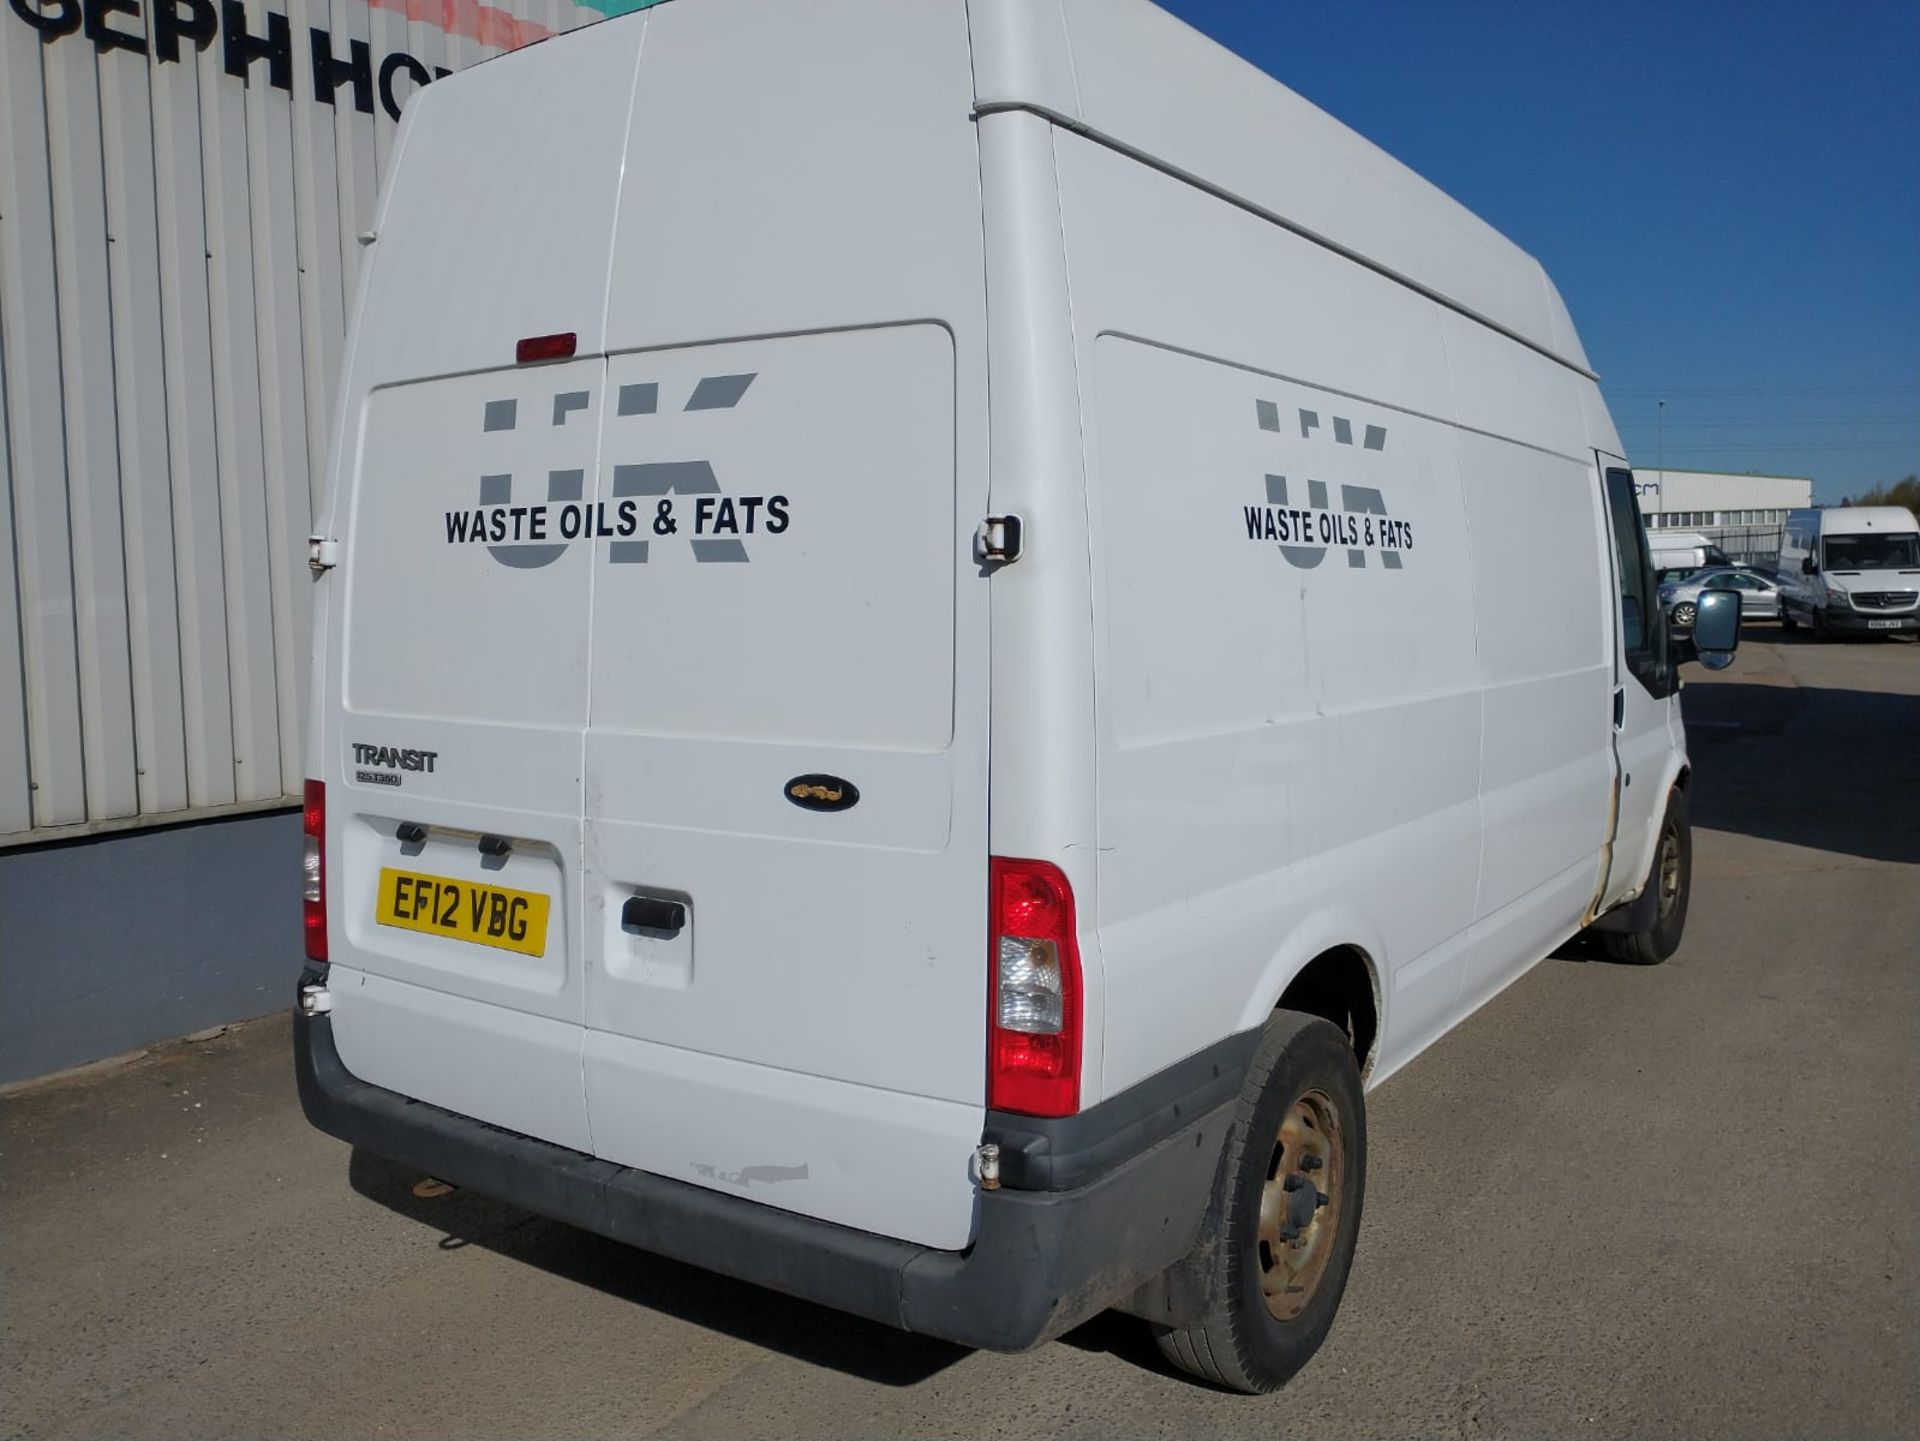 2012 Ford Transit Panel Van 2.2 5dr Medium Roof Panel Van - CL505 - Location: Corby - Image 2 of 13